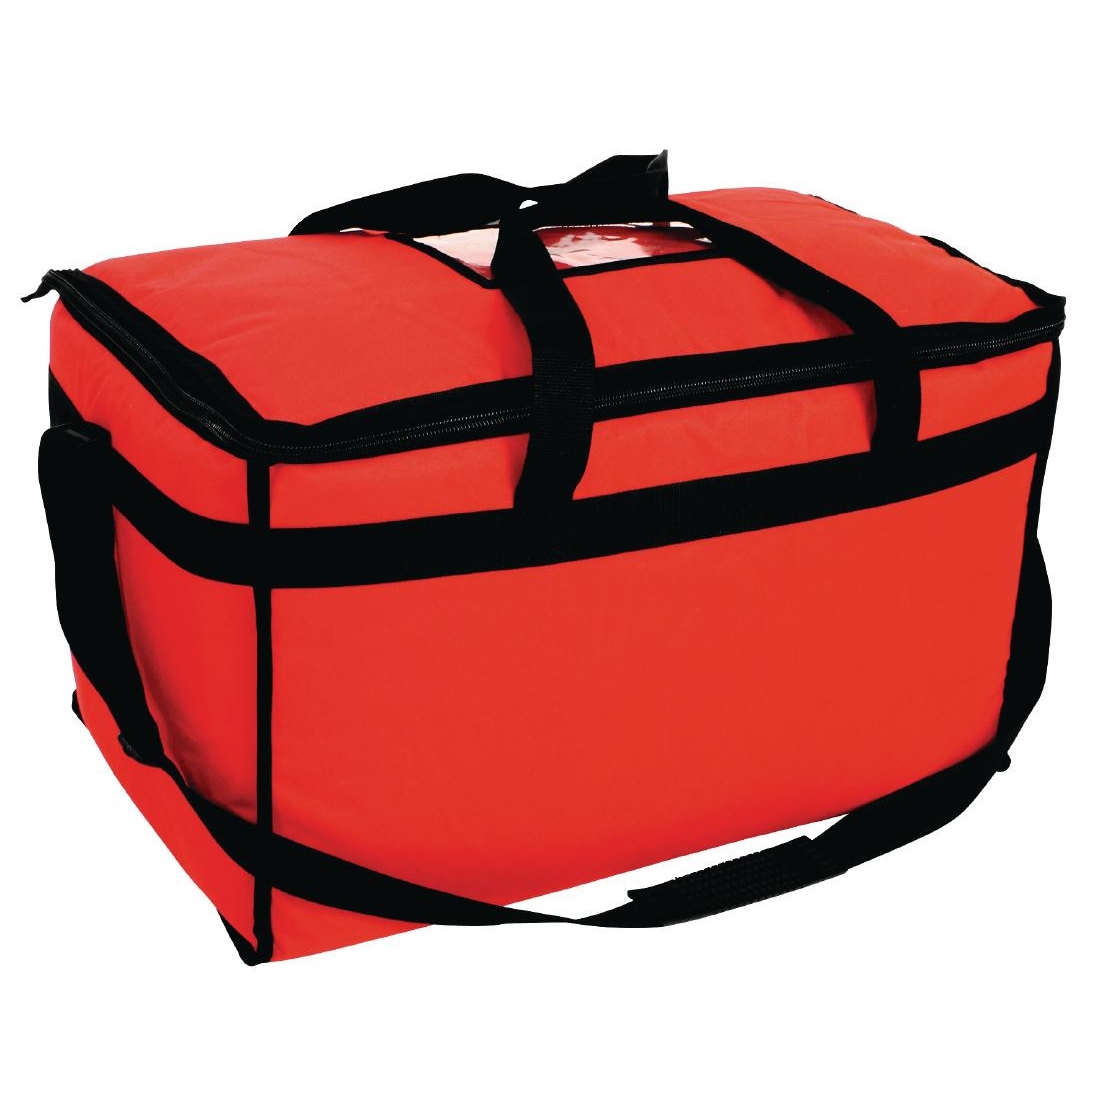 Vogue Large insulated Food Bag 355(H) x 580(W) x 380(D)mm